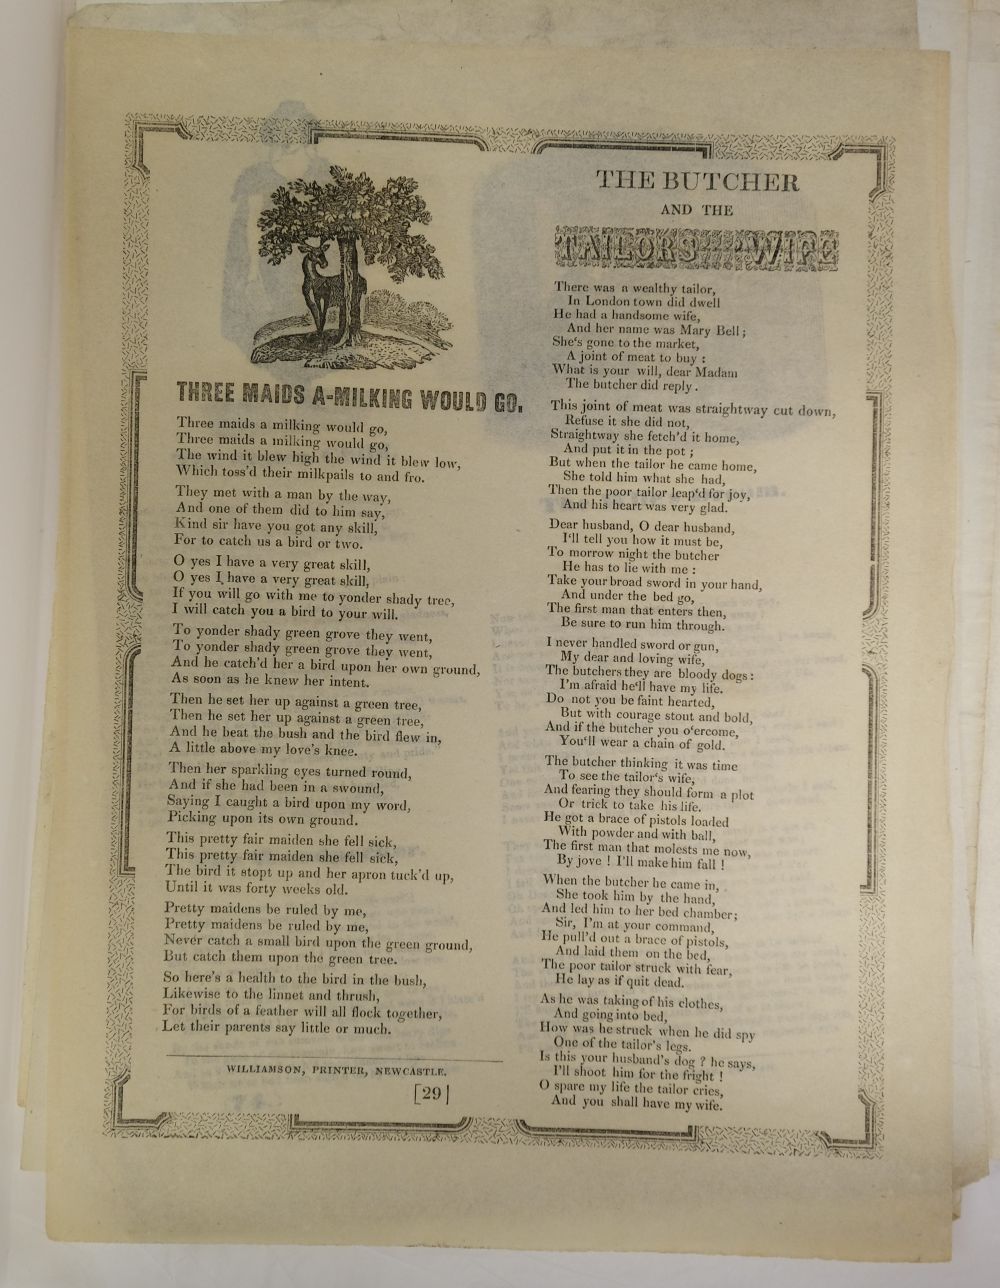 Broadsheets & Broadsides. A collection of 21 broadsheets & broadsides, early 19th century - Image 6 of 7